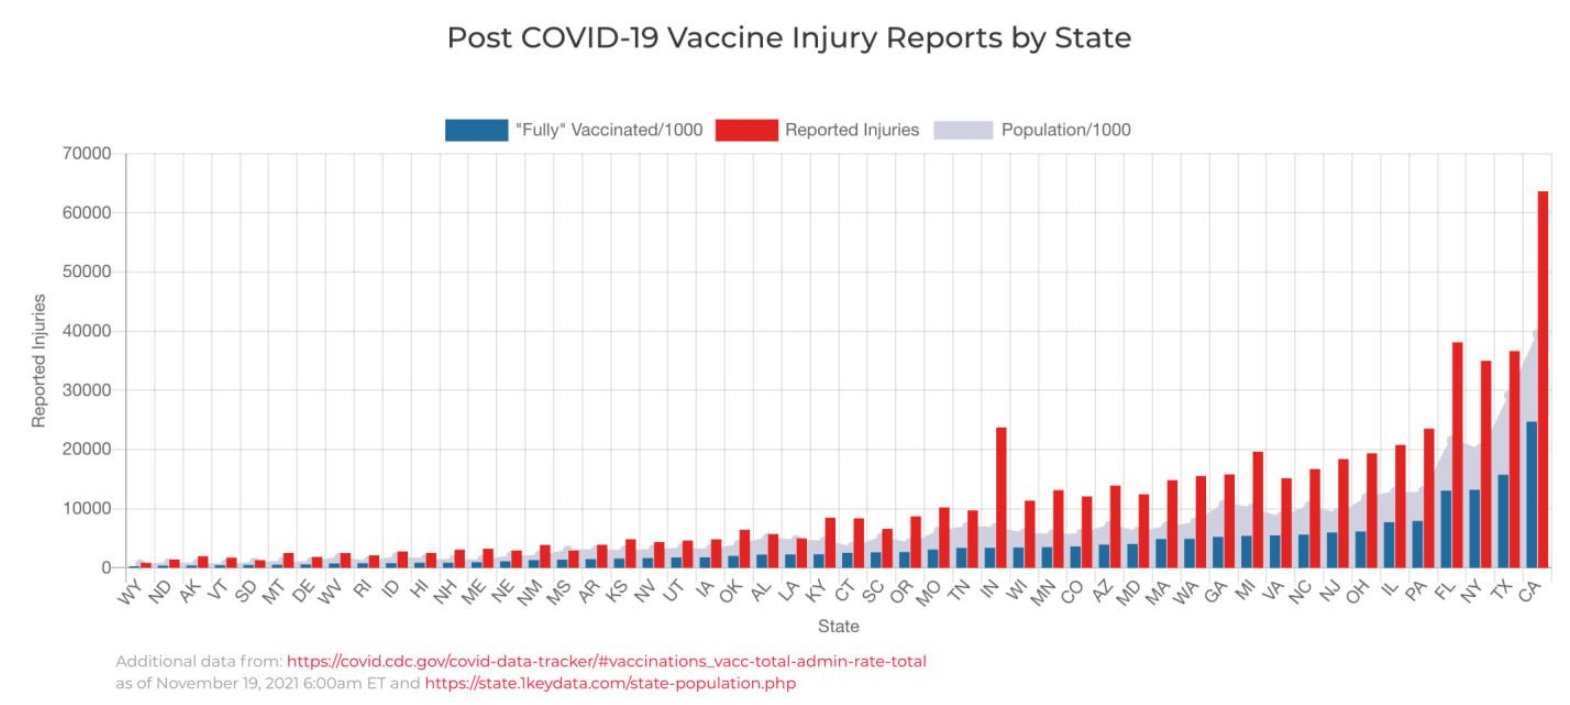 Amount of vaccine injury reports by state